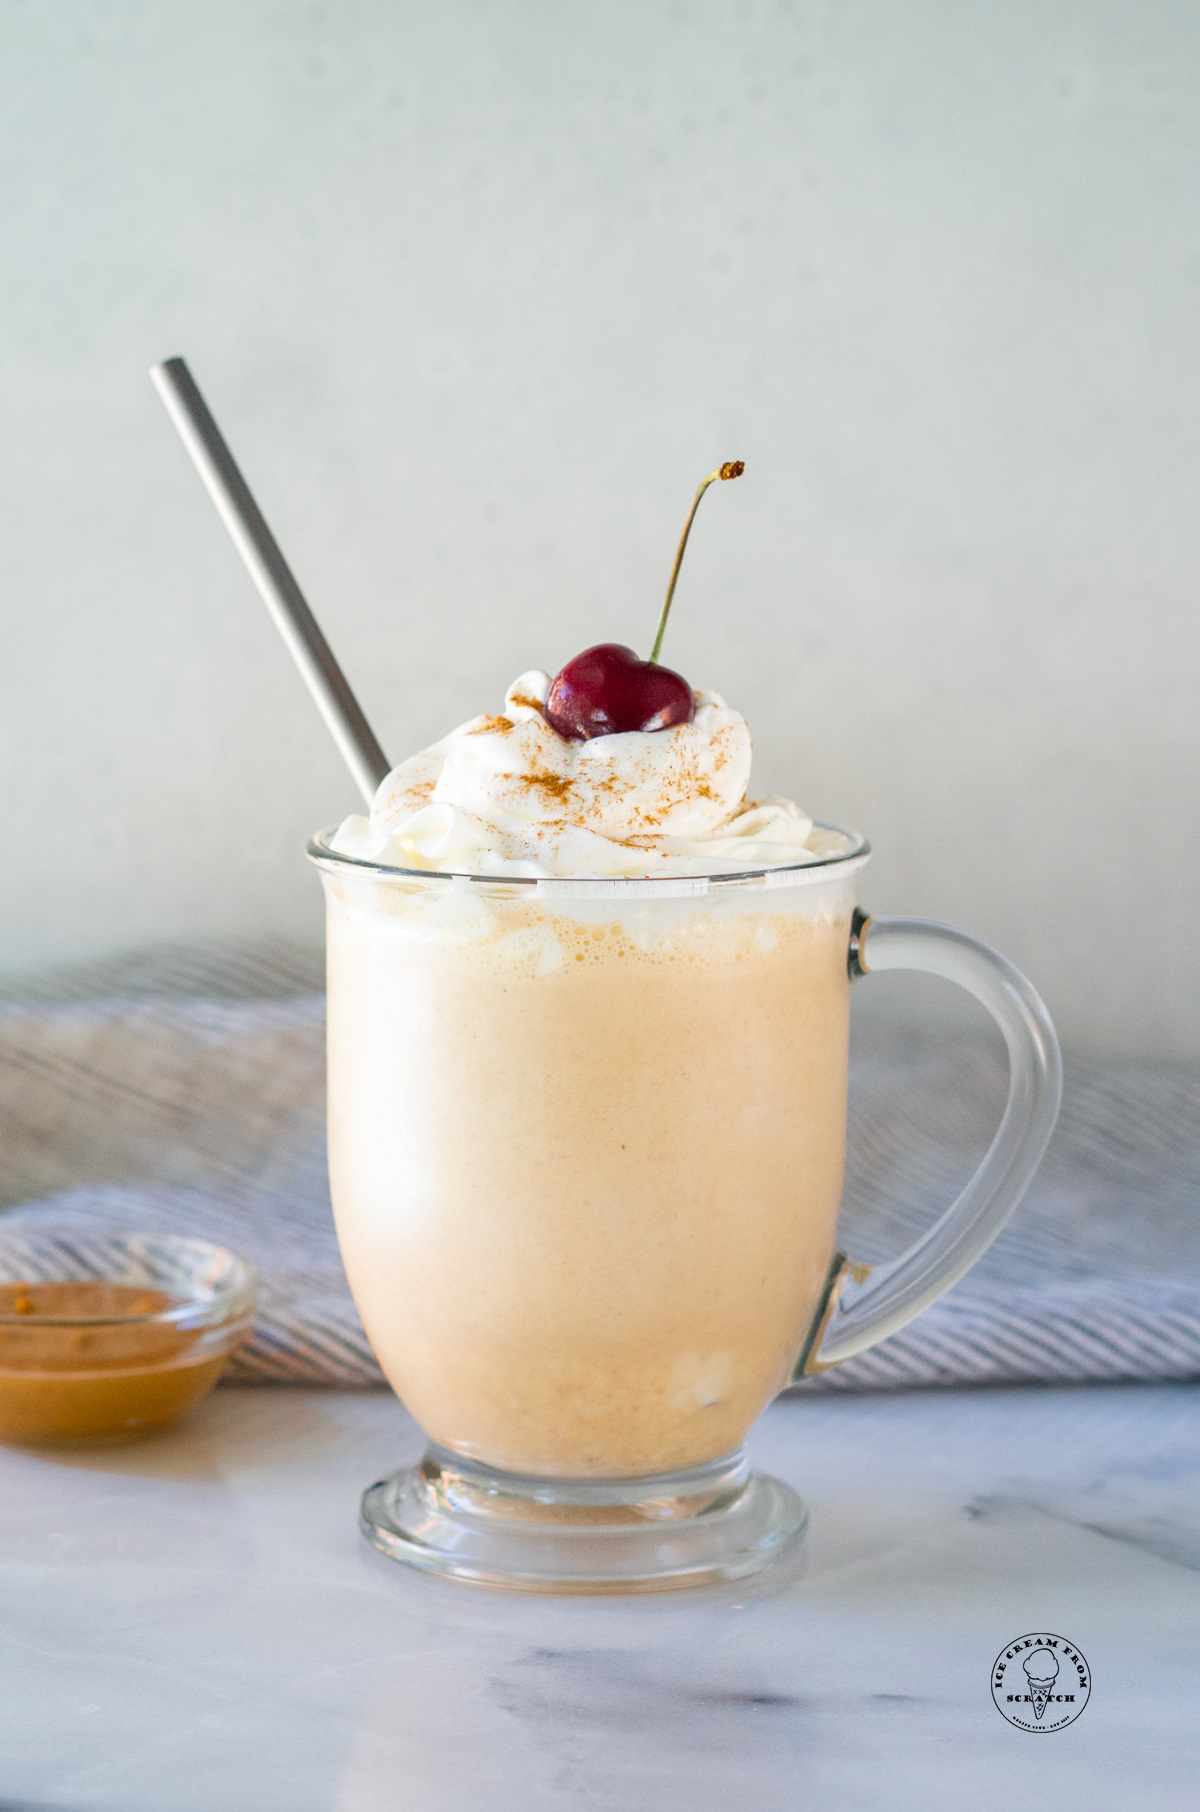 peanut butter milkshake with a cherry on top